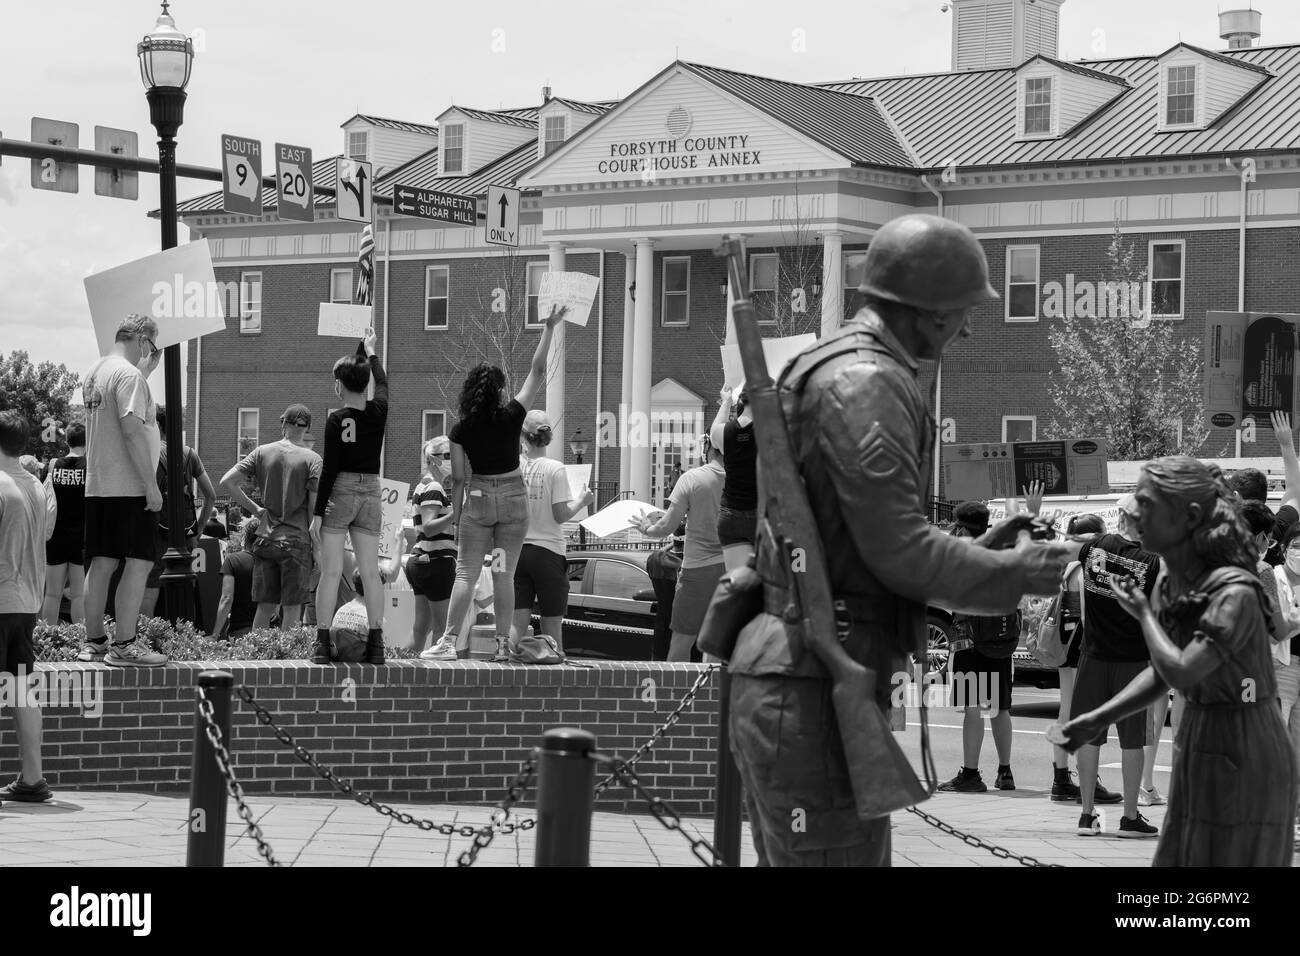 Protesters in front of the Forsyth County Courthouse. Stock Photo